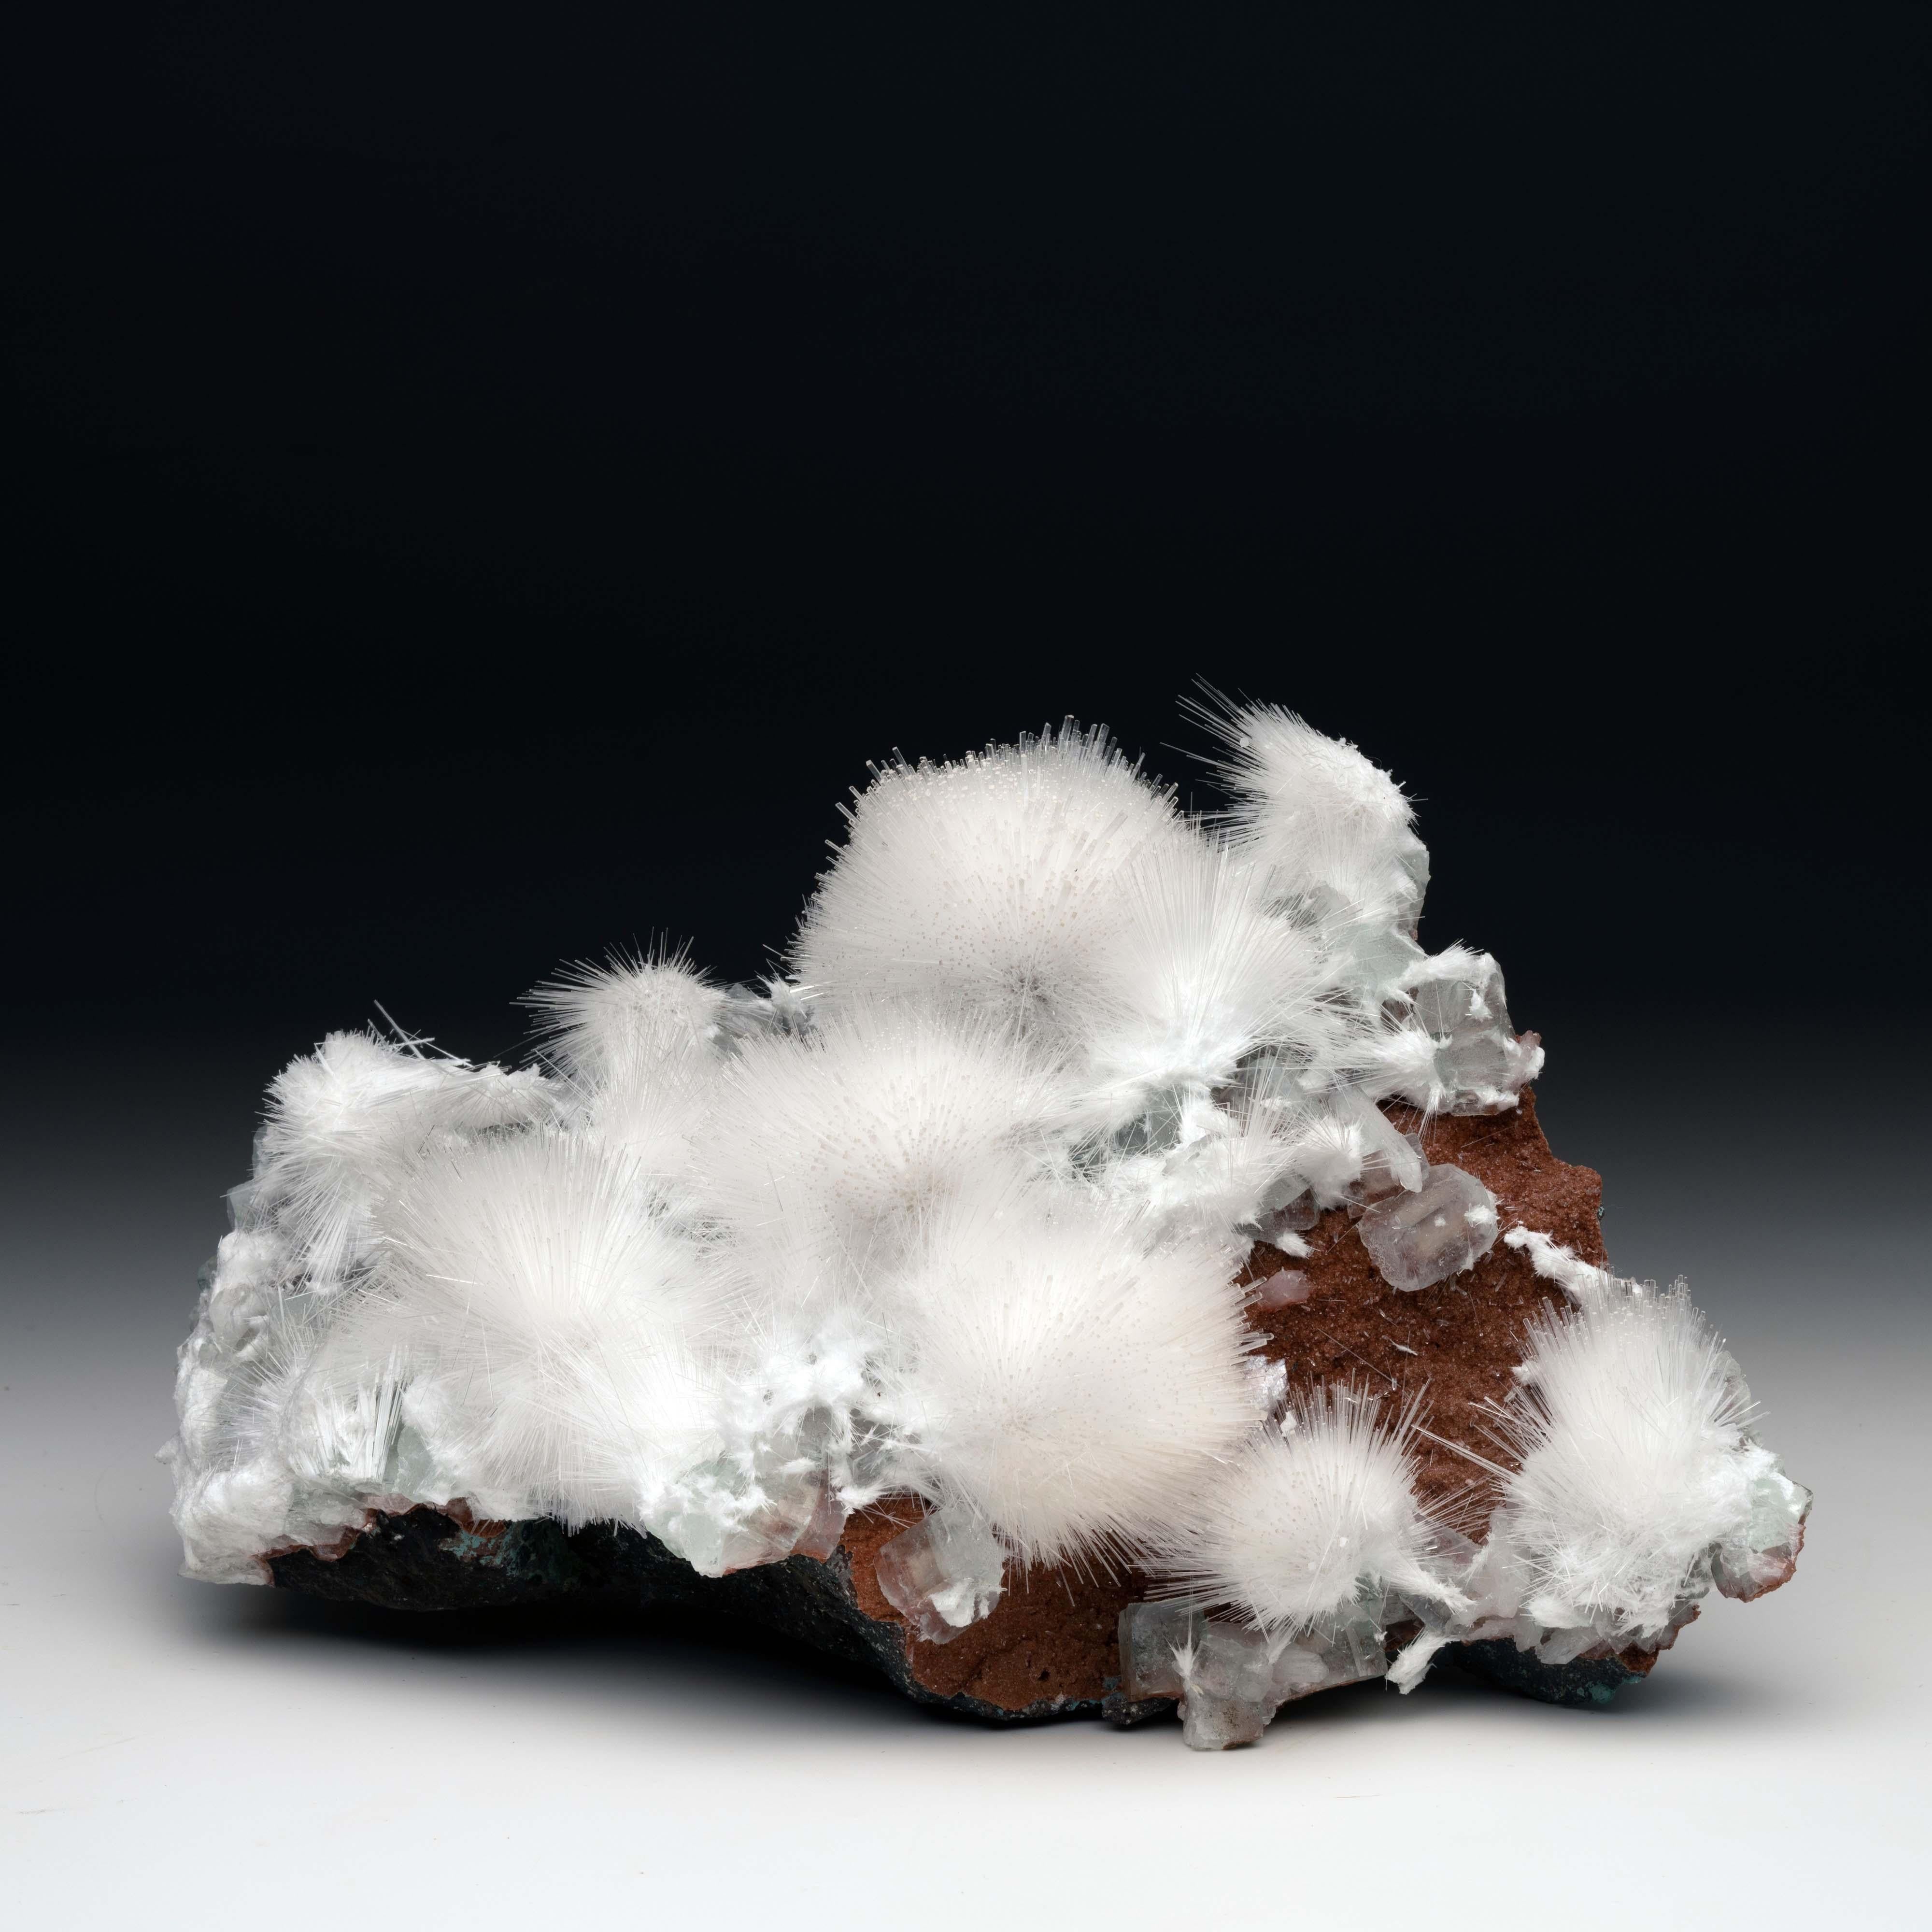 This mesolite and apophyllite on a red heulandite matrix was mined out of an extremely small pocket in India. Puffs of white mesolite layer over apophyllite on a rocky bed. The white mesolite and clear apophyllite beautifully contrast the deep red